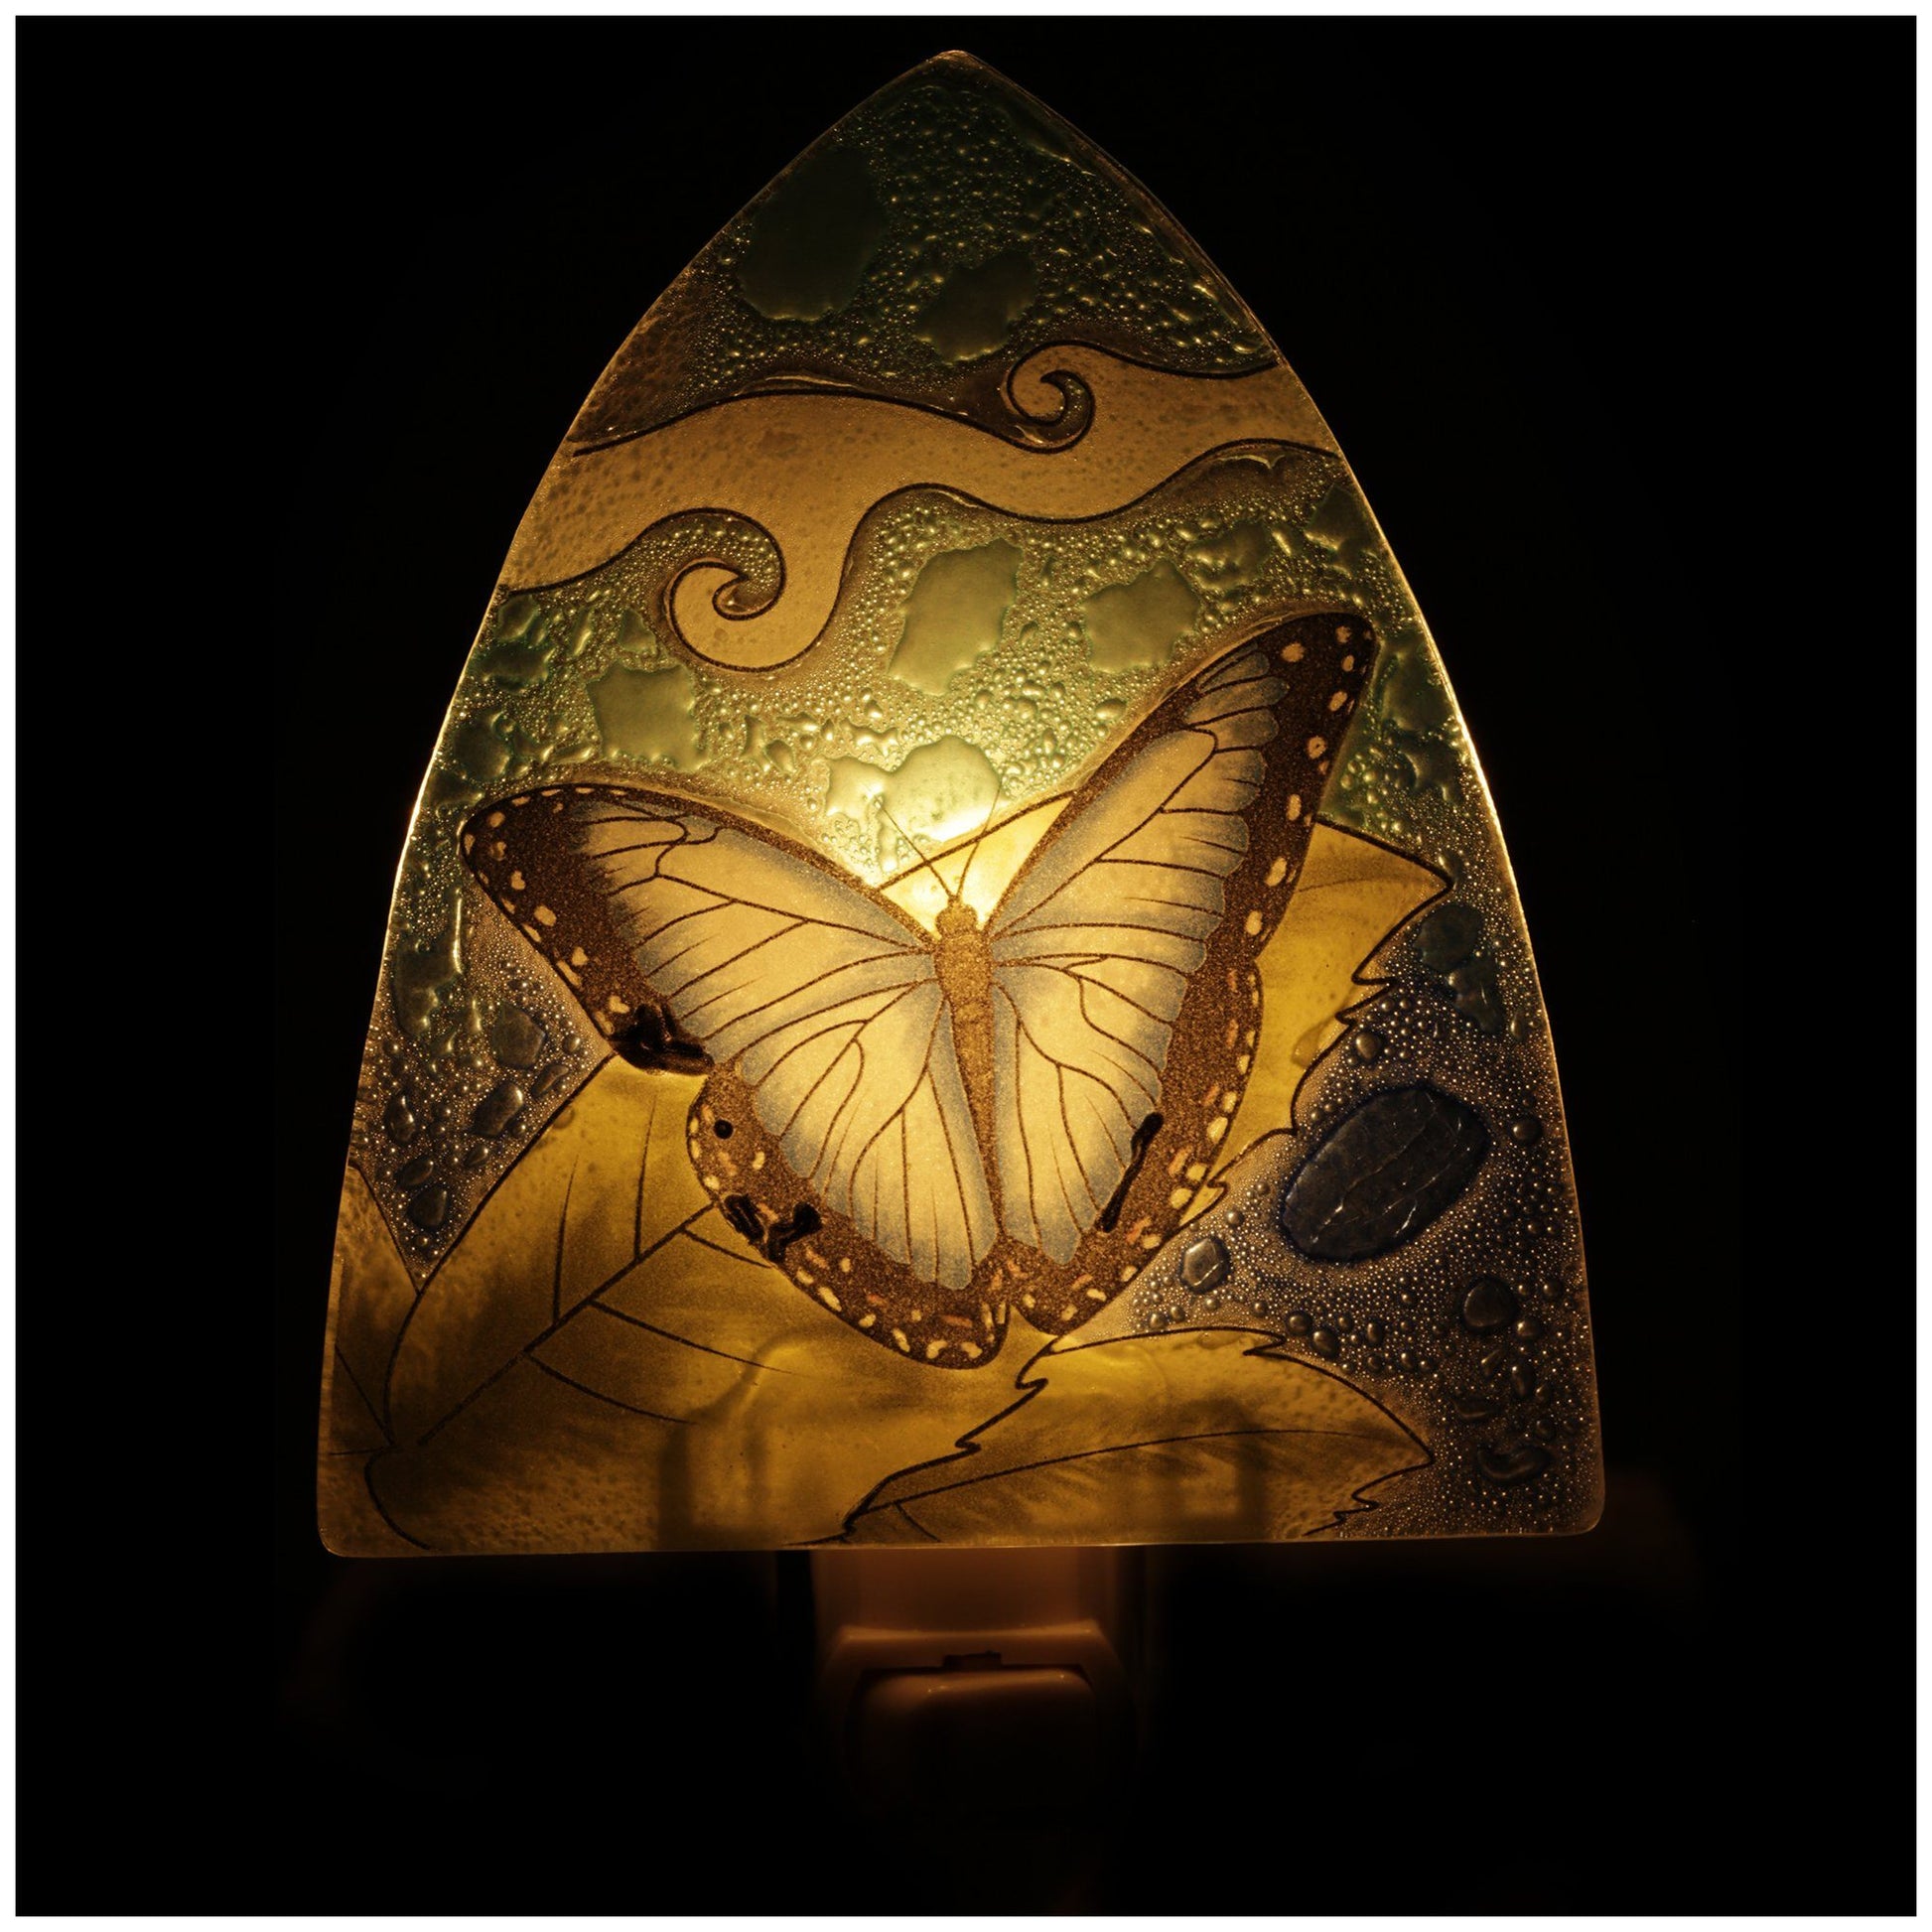 Blue Butterfly Recycled Glass Night Light